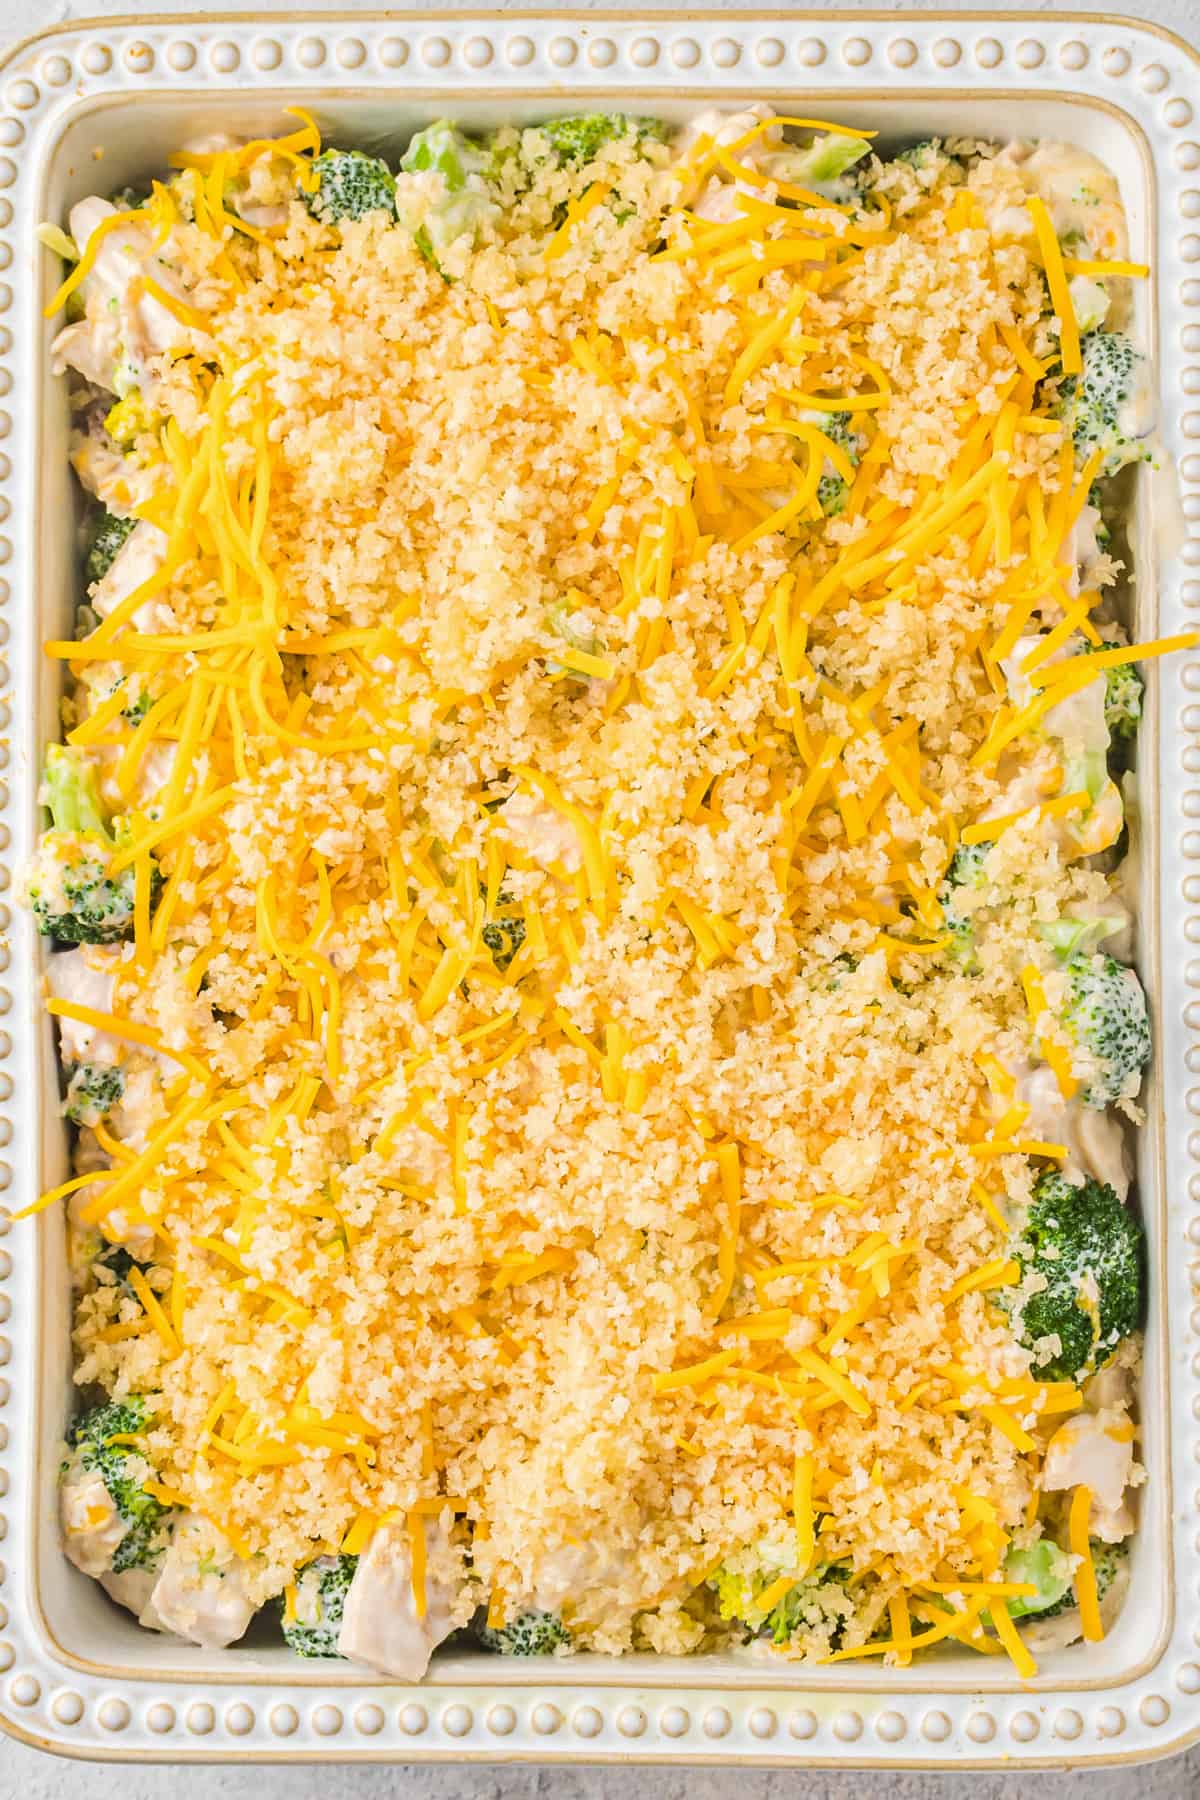 Chicken Divan topped with shredded cheese and panko breadcrumbs before baking.